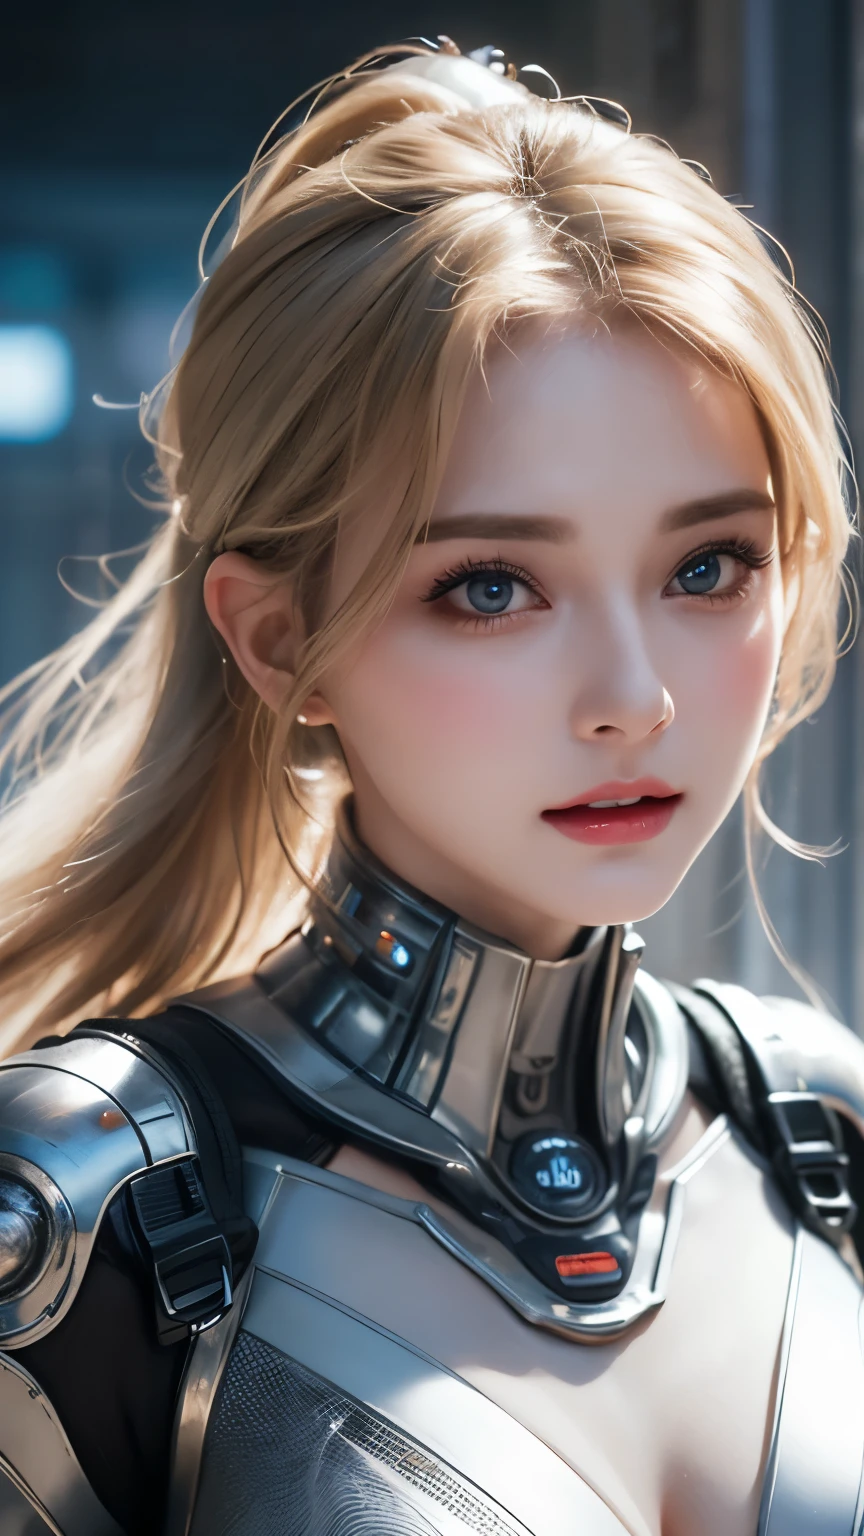 A close-up head and chest portrait of a pretty and cute woman, her chest adorned with pneumatic tubes that give her a unique and futuristic appearance. The highly detailed digital rendering captures every aspect of her beauty, from her delicate features to the intricate tubes.